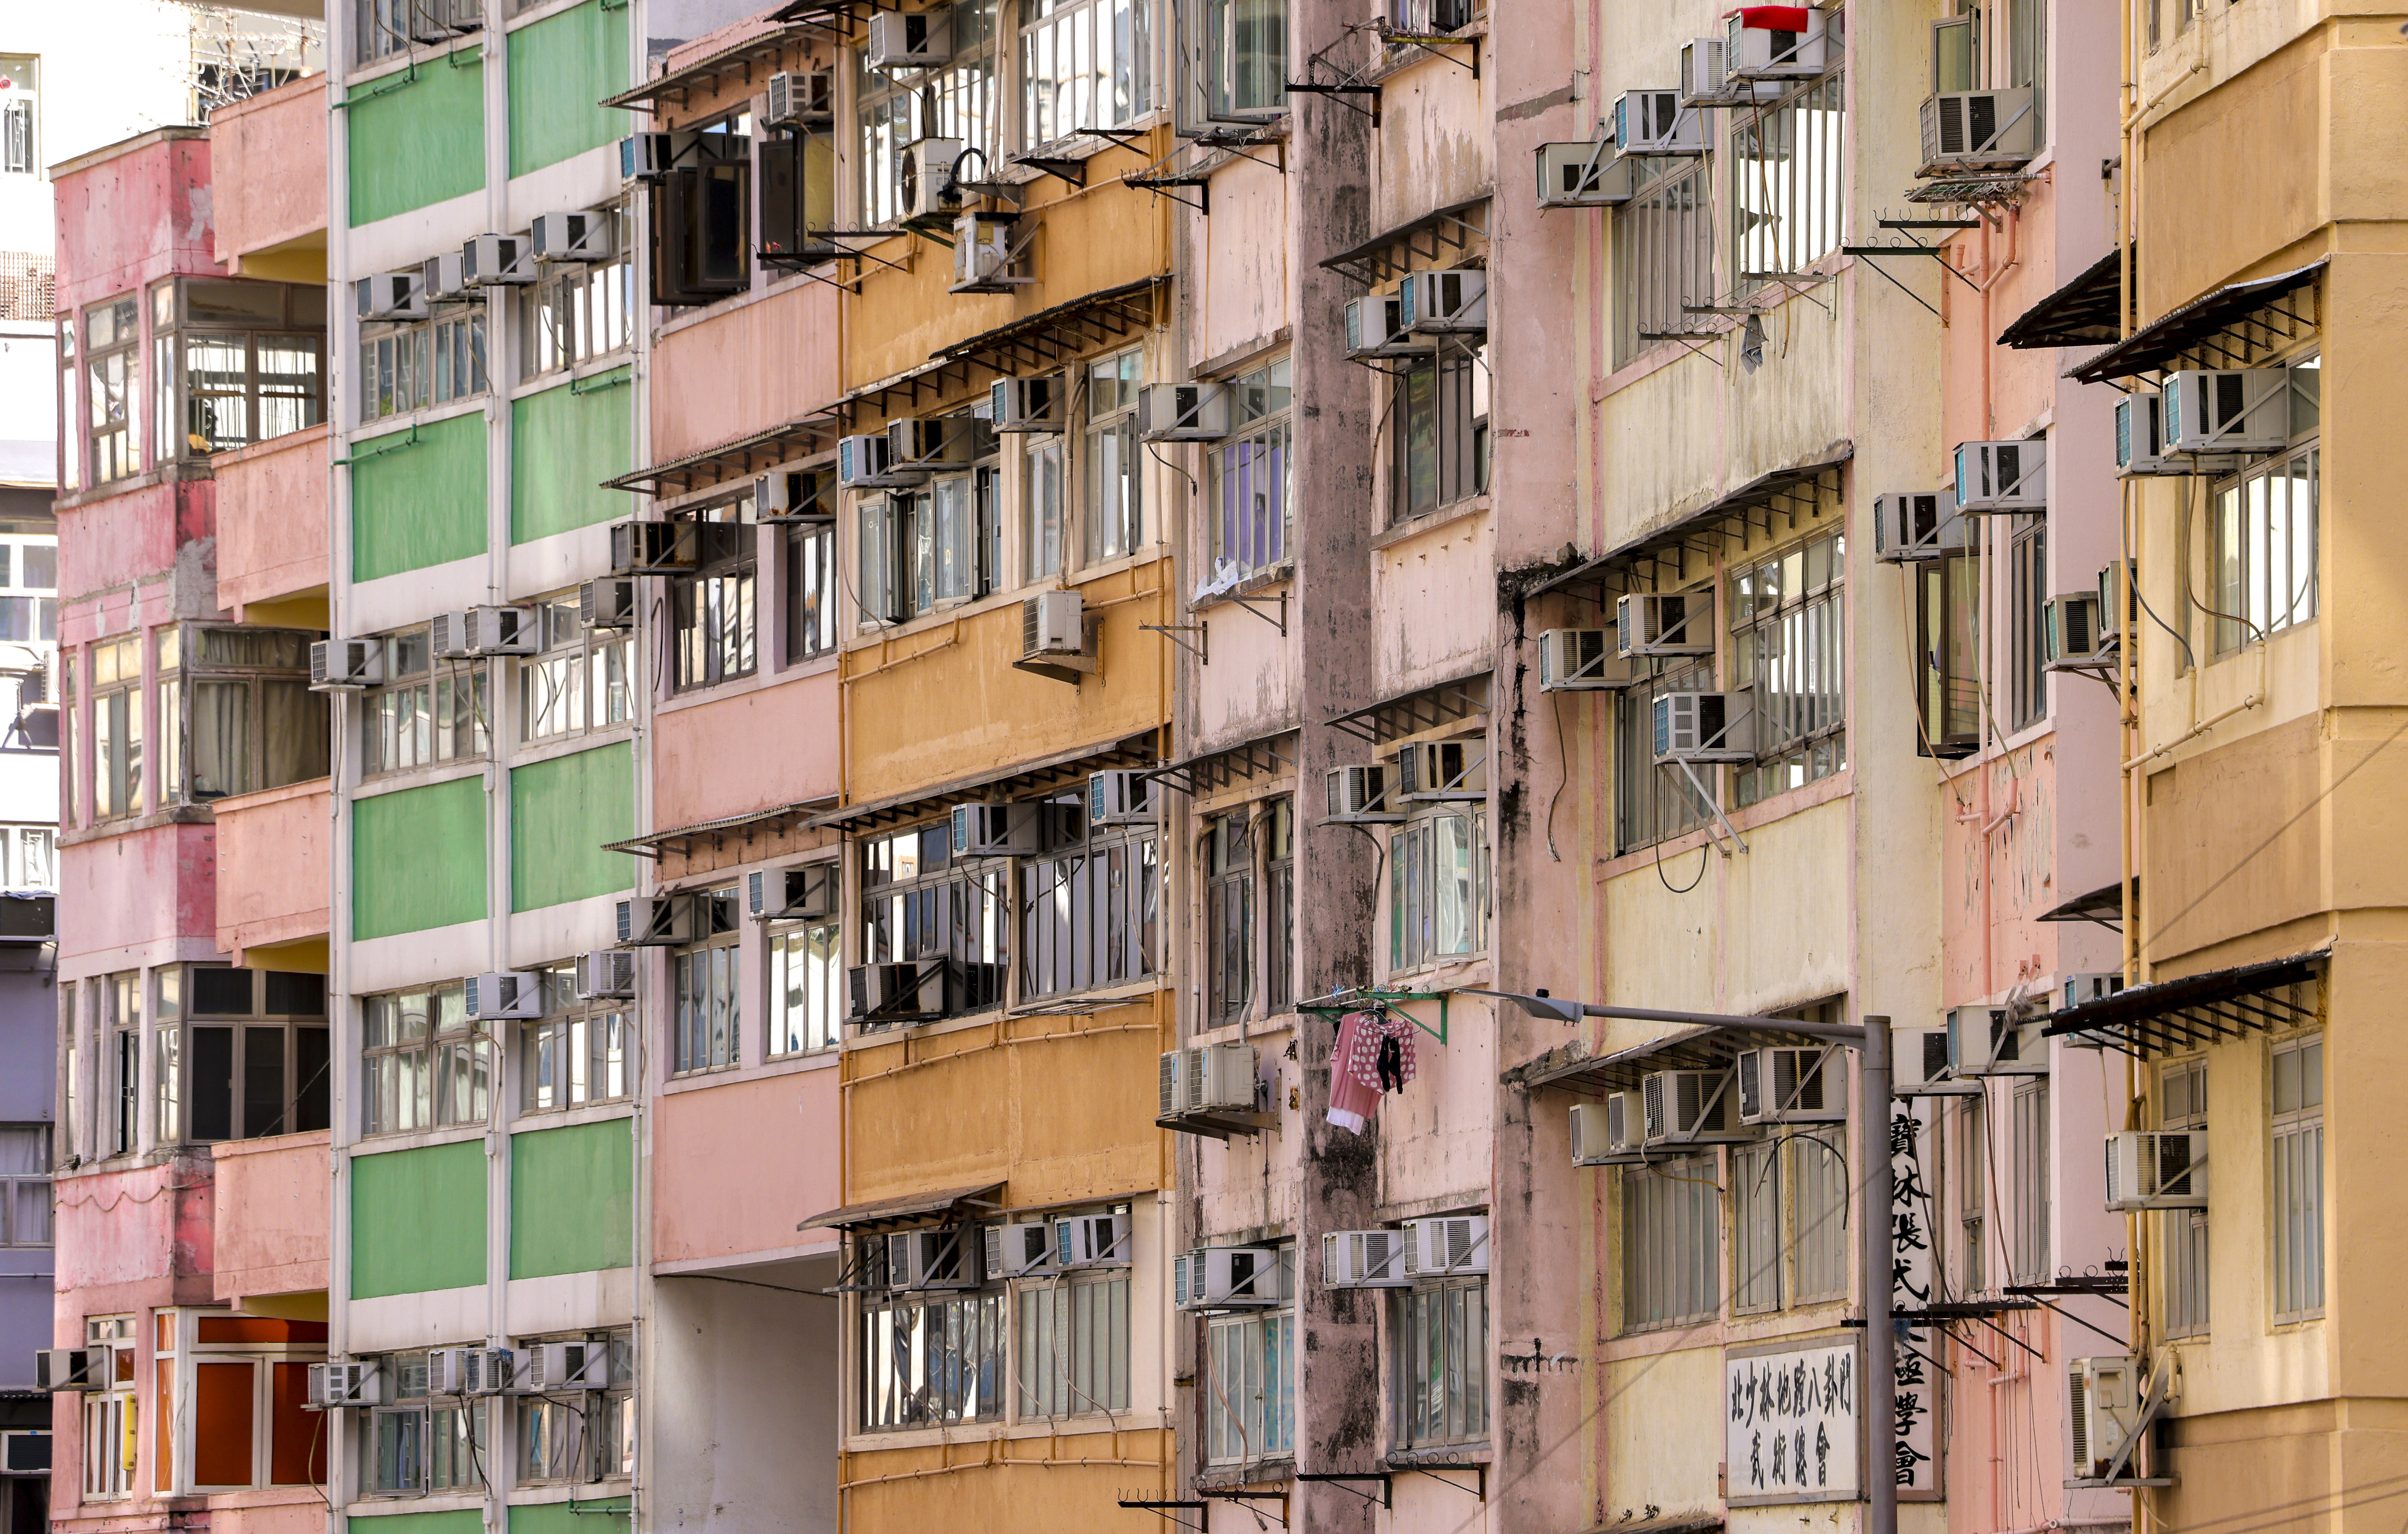 About one-fifth of the city’s 108,000 subdivided flats are on Hong Kong Island, with most in Eastern district, which includes Fortress Hill, Sai Wan Ho and Shau Kei Wan. Photo: Jelly Tse